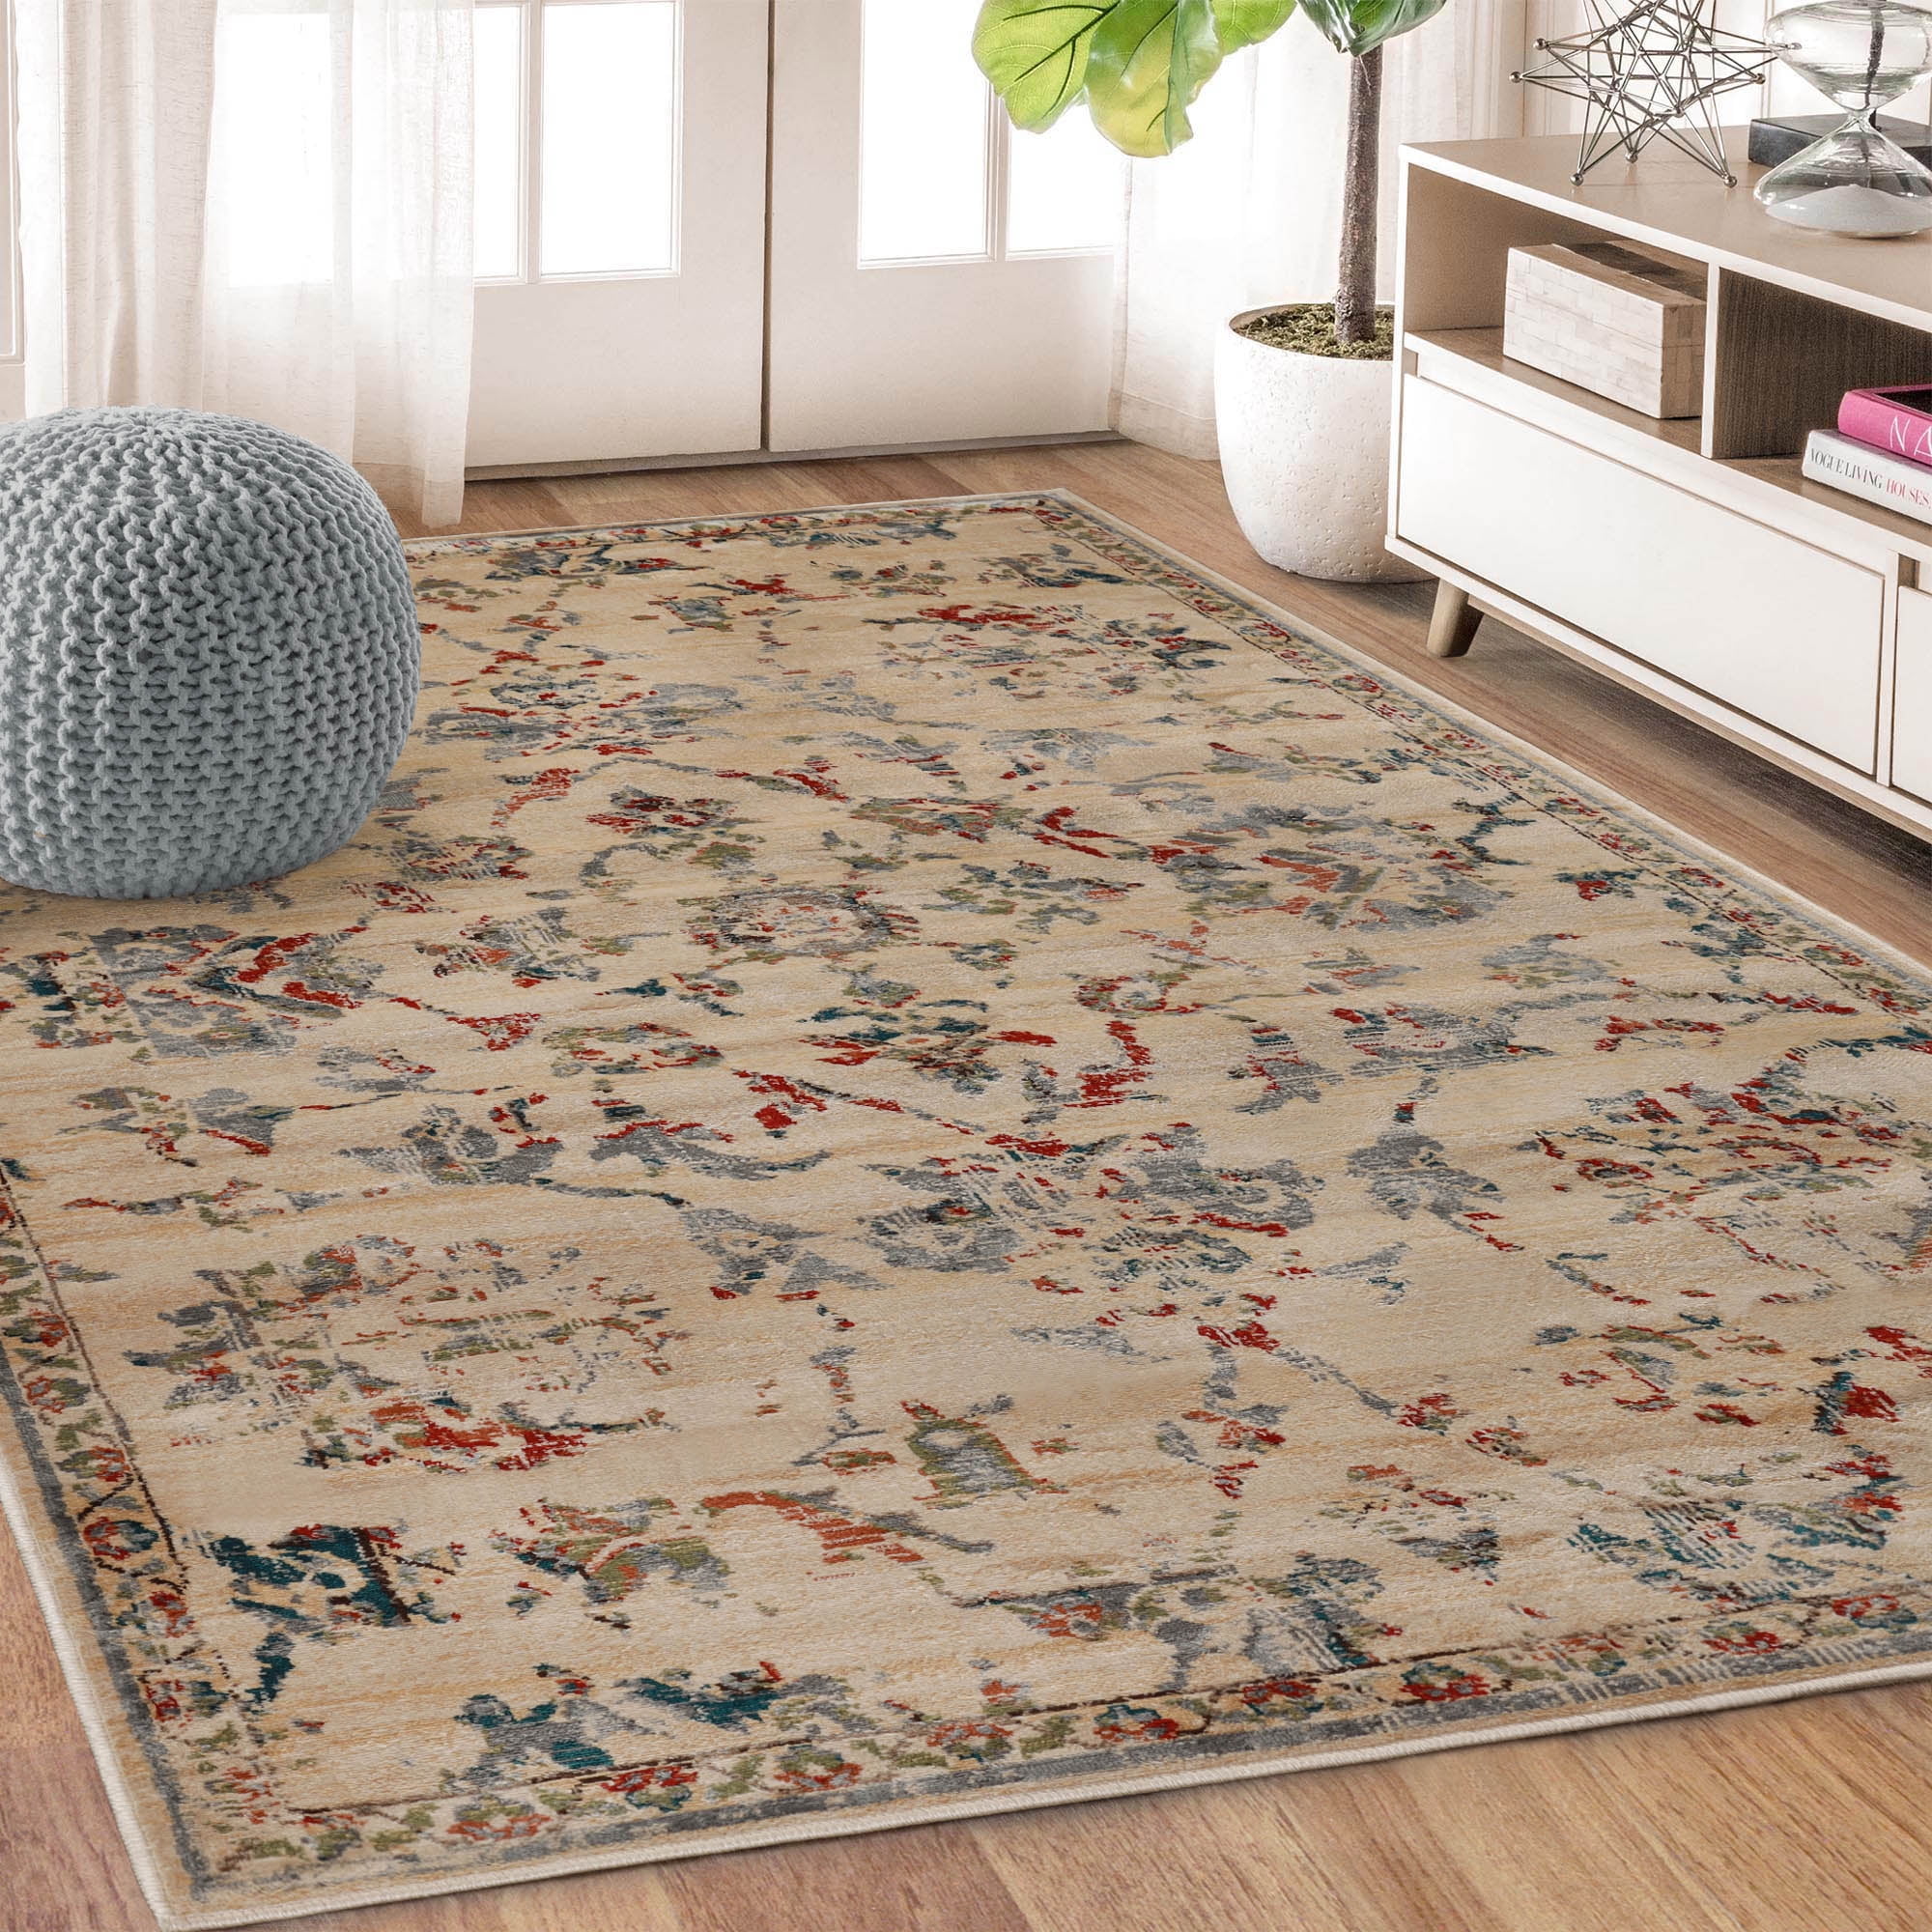 Tacky Pad for Rugs over Carpet – Incredible Rugs and Decor